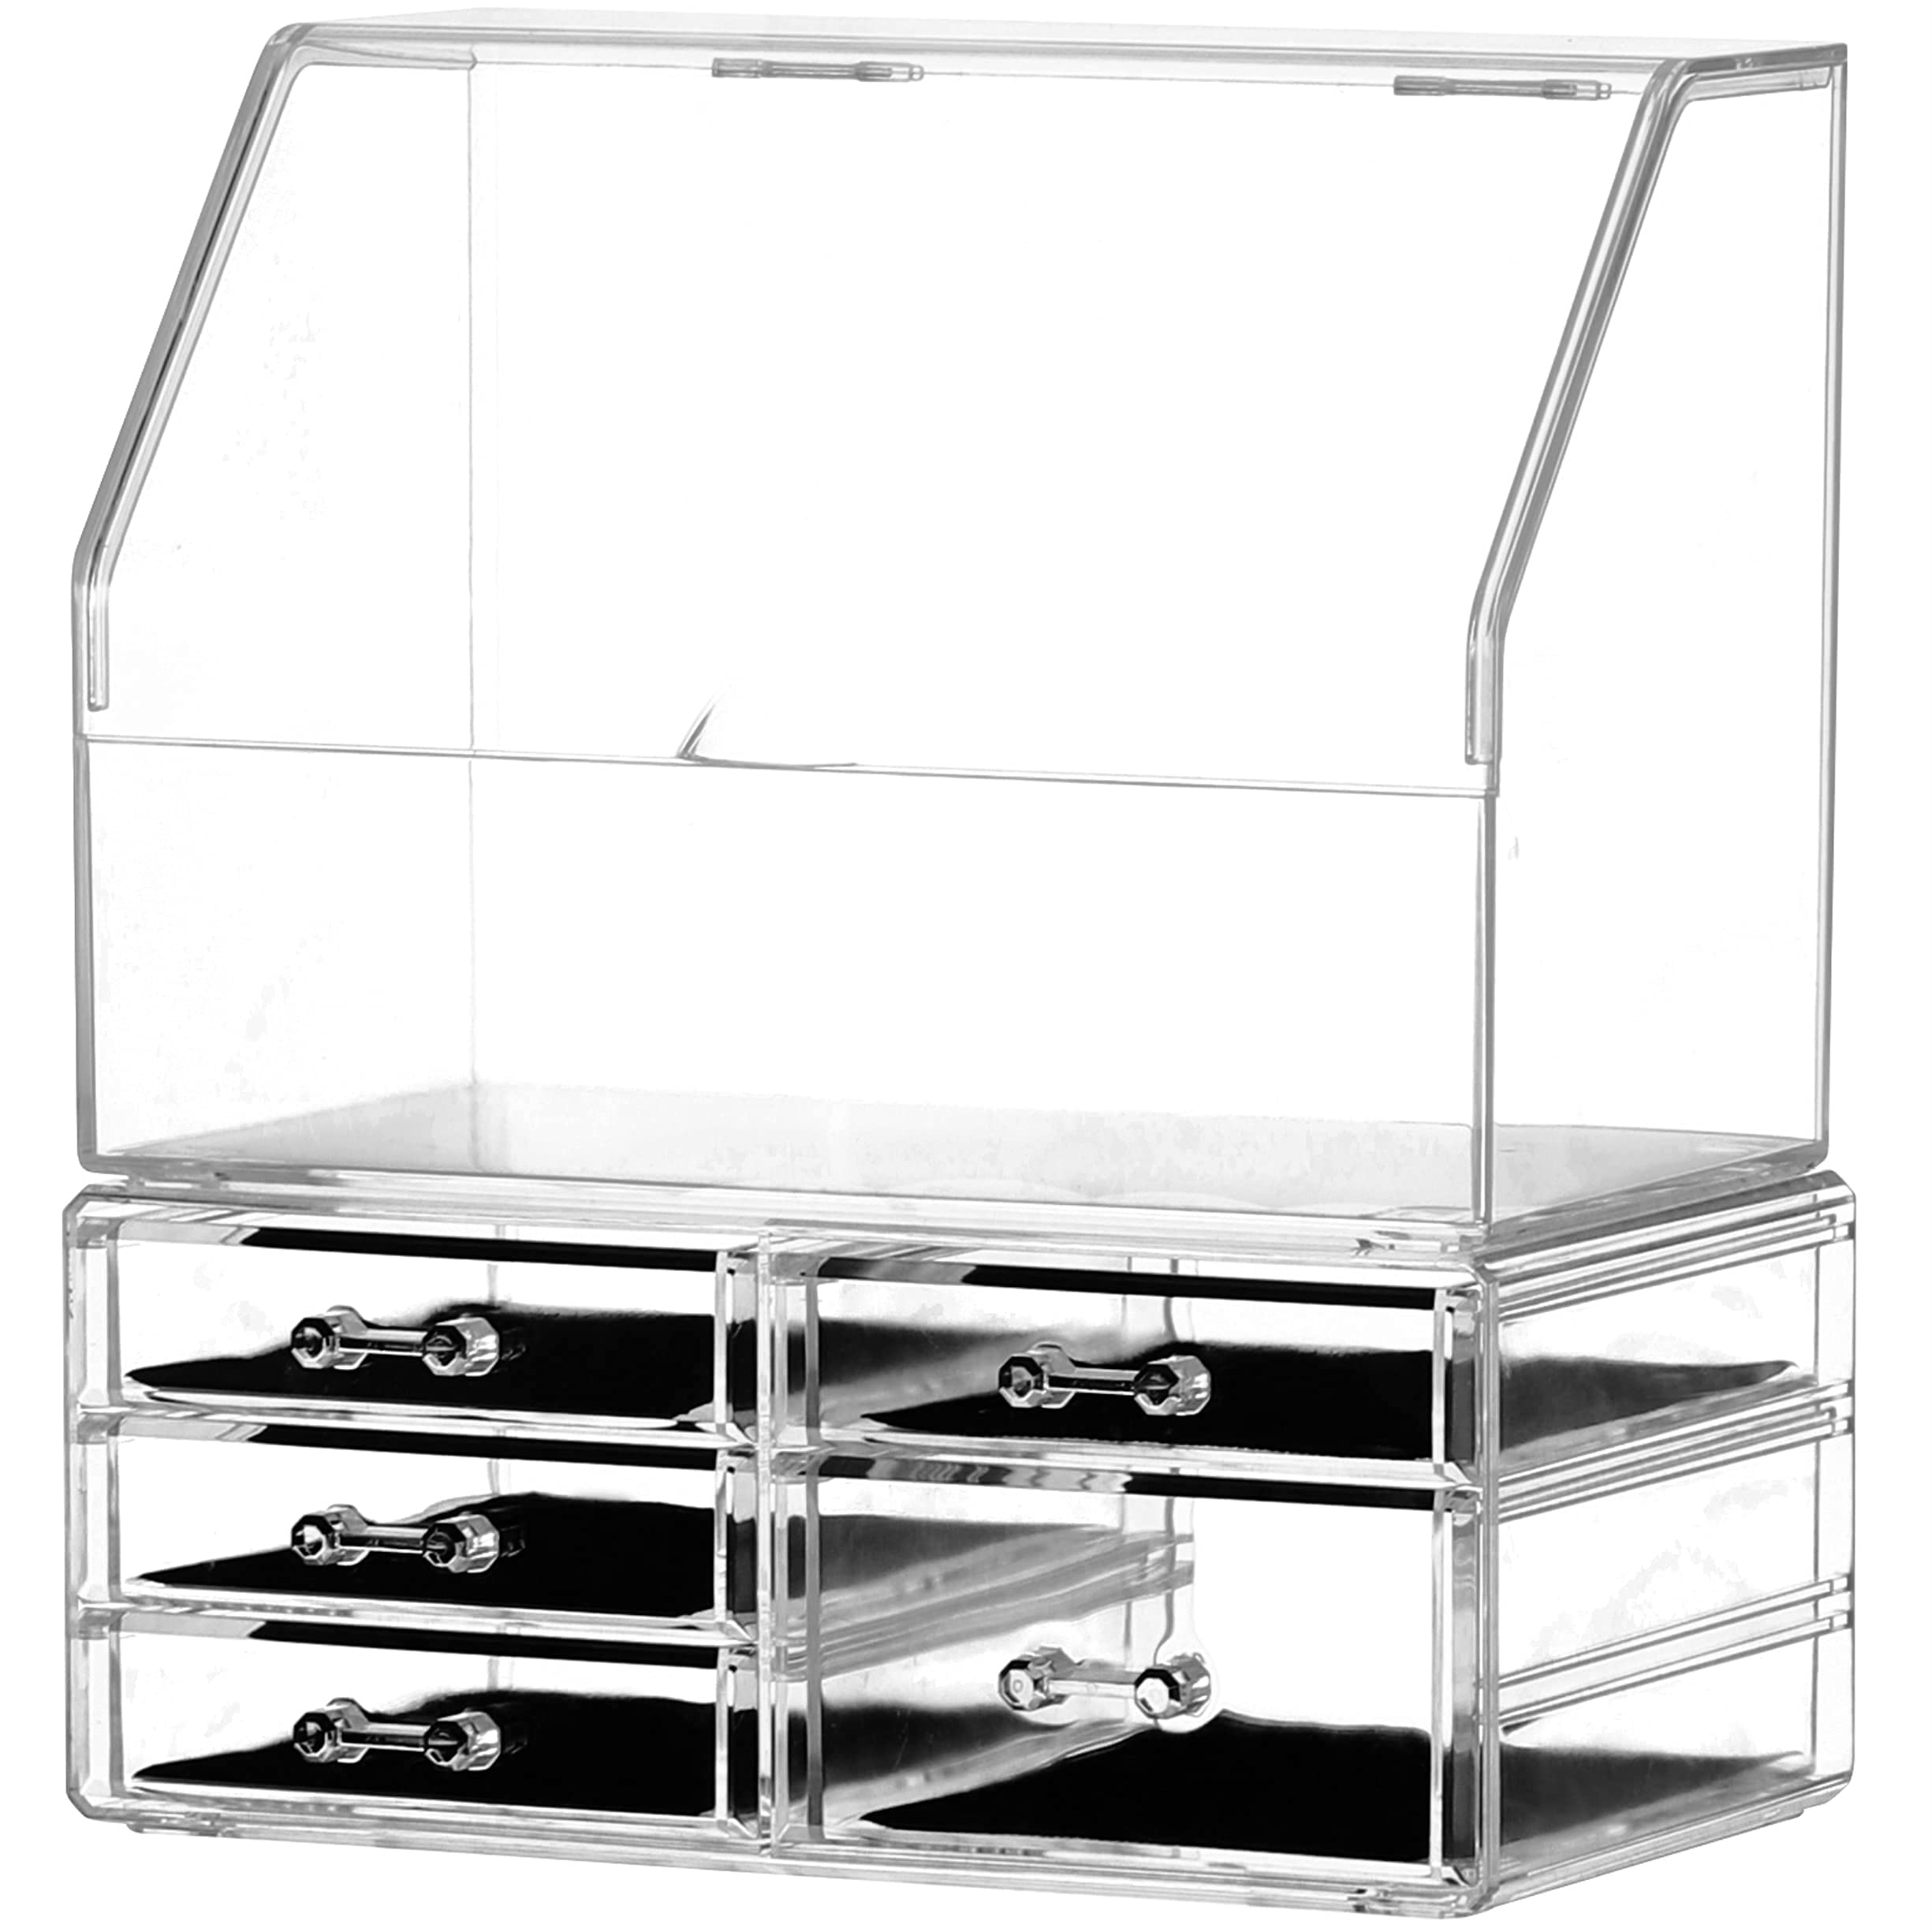 Cq acrylic Cosmetic Display Cases With LId Dustproof Waterproof for  Bathroom Countertop Stackable Clear Makeup Organizer